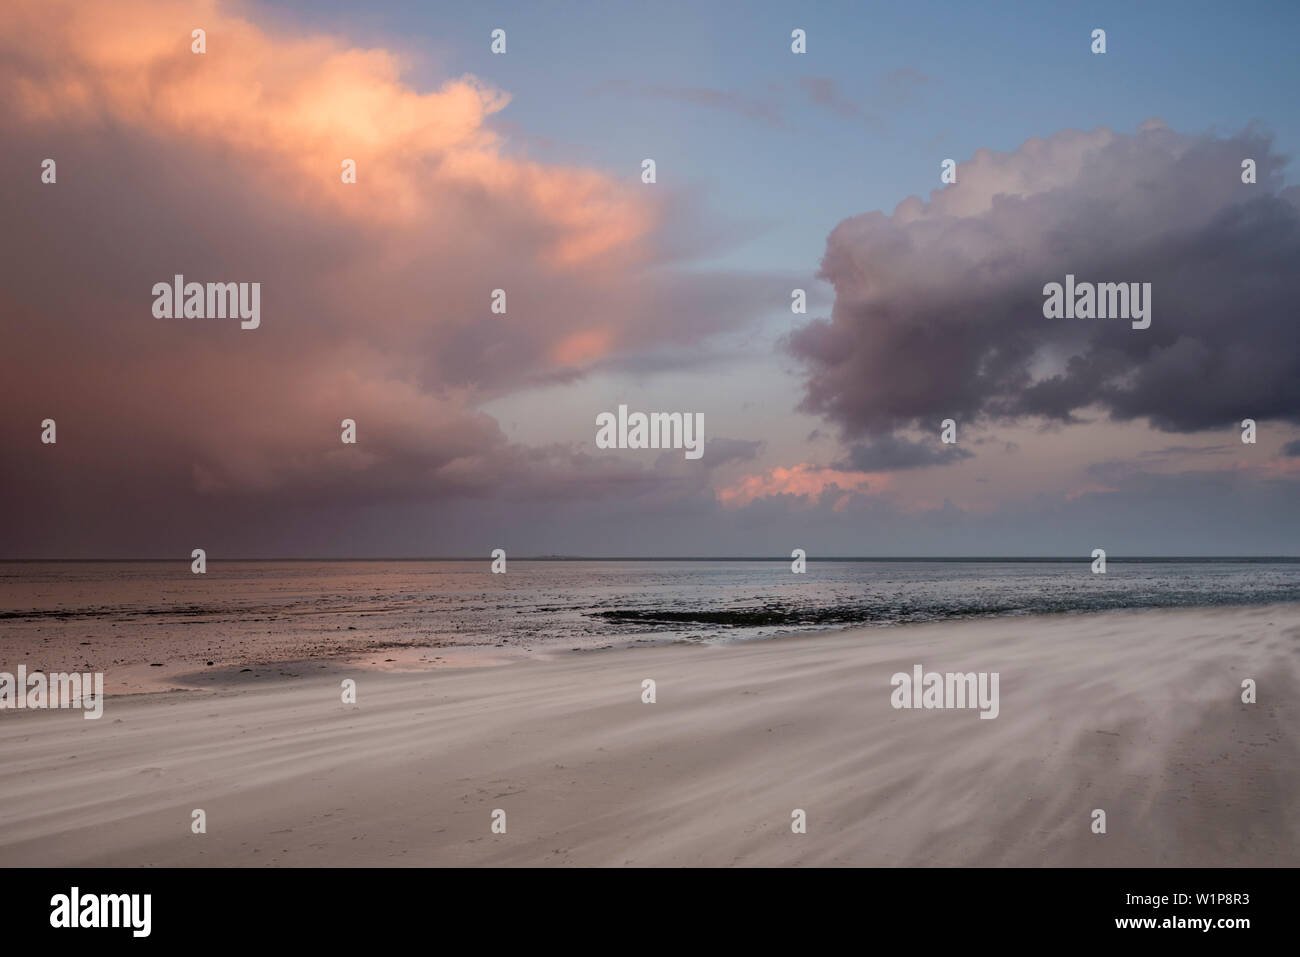 Sandy beach in evening light at storm, North Sea, Wattenmeer National Park, Schillig, Wangerland, Friesland District, Lower Saxony, Germany, Europe Stock Photo